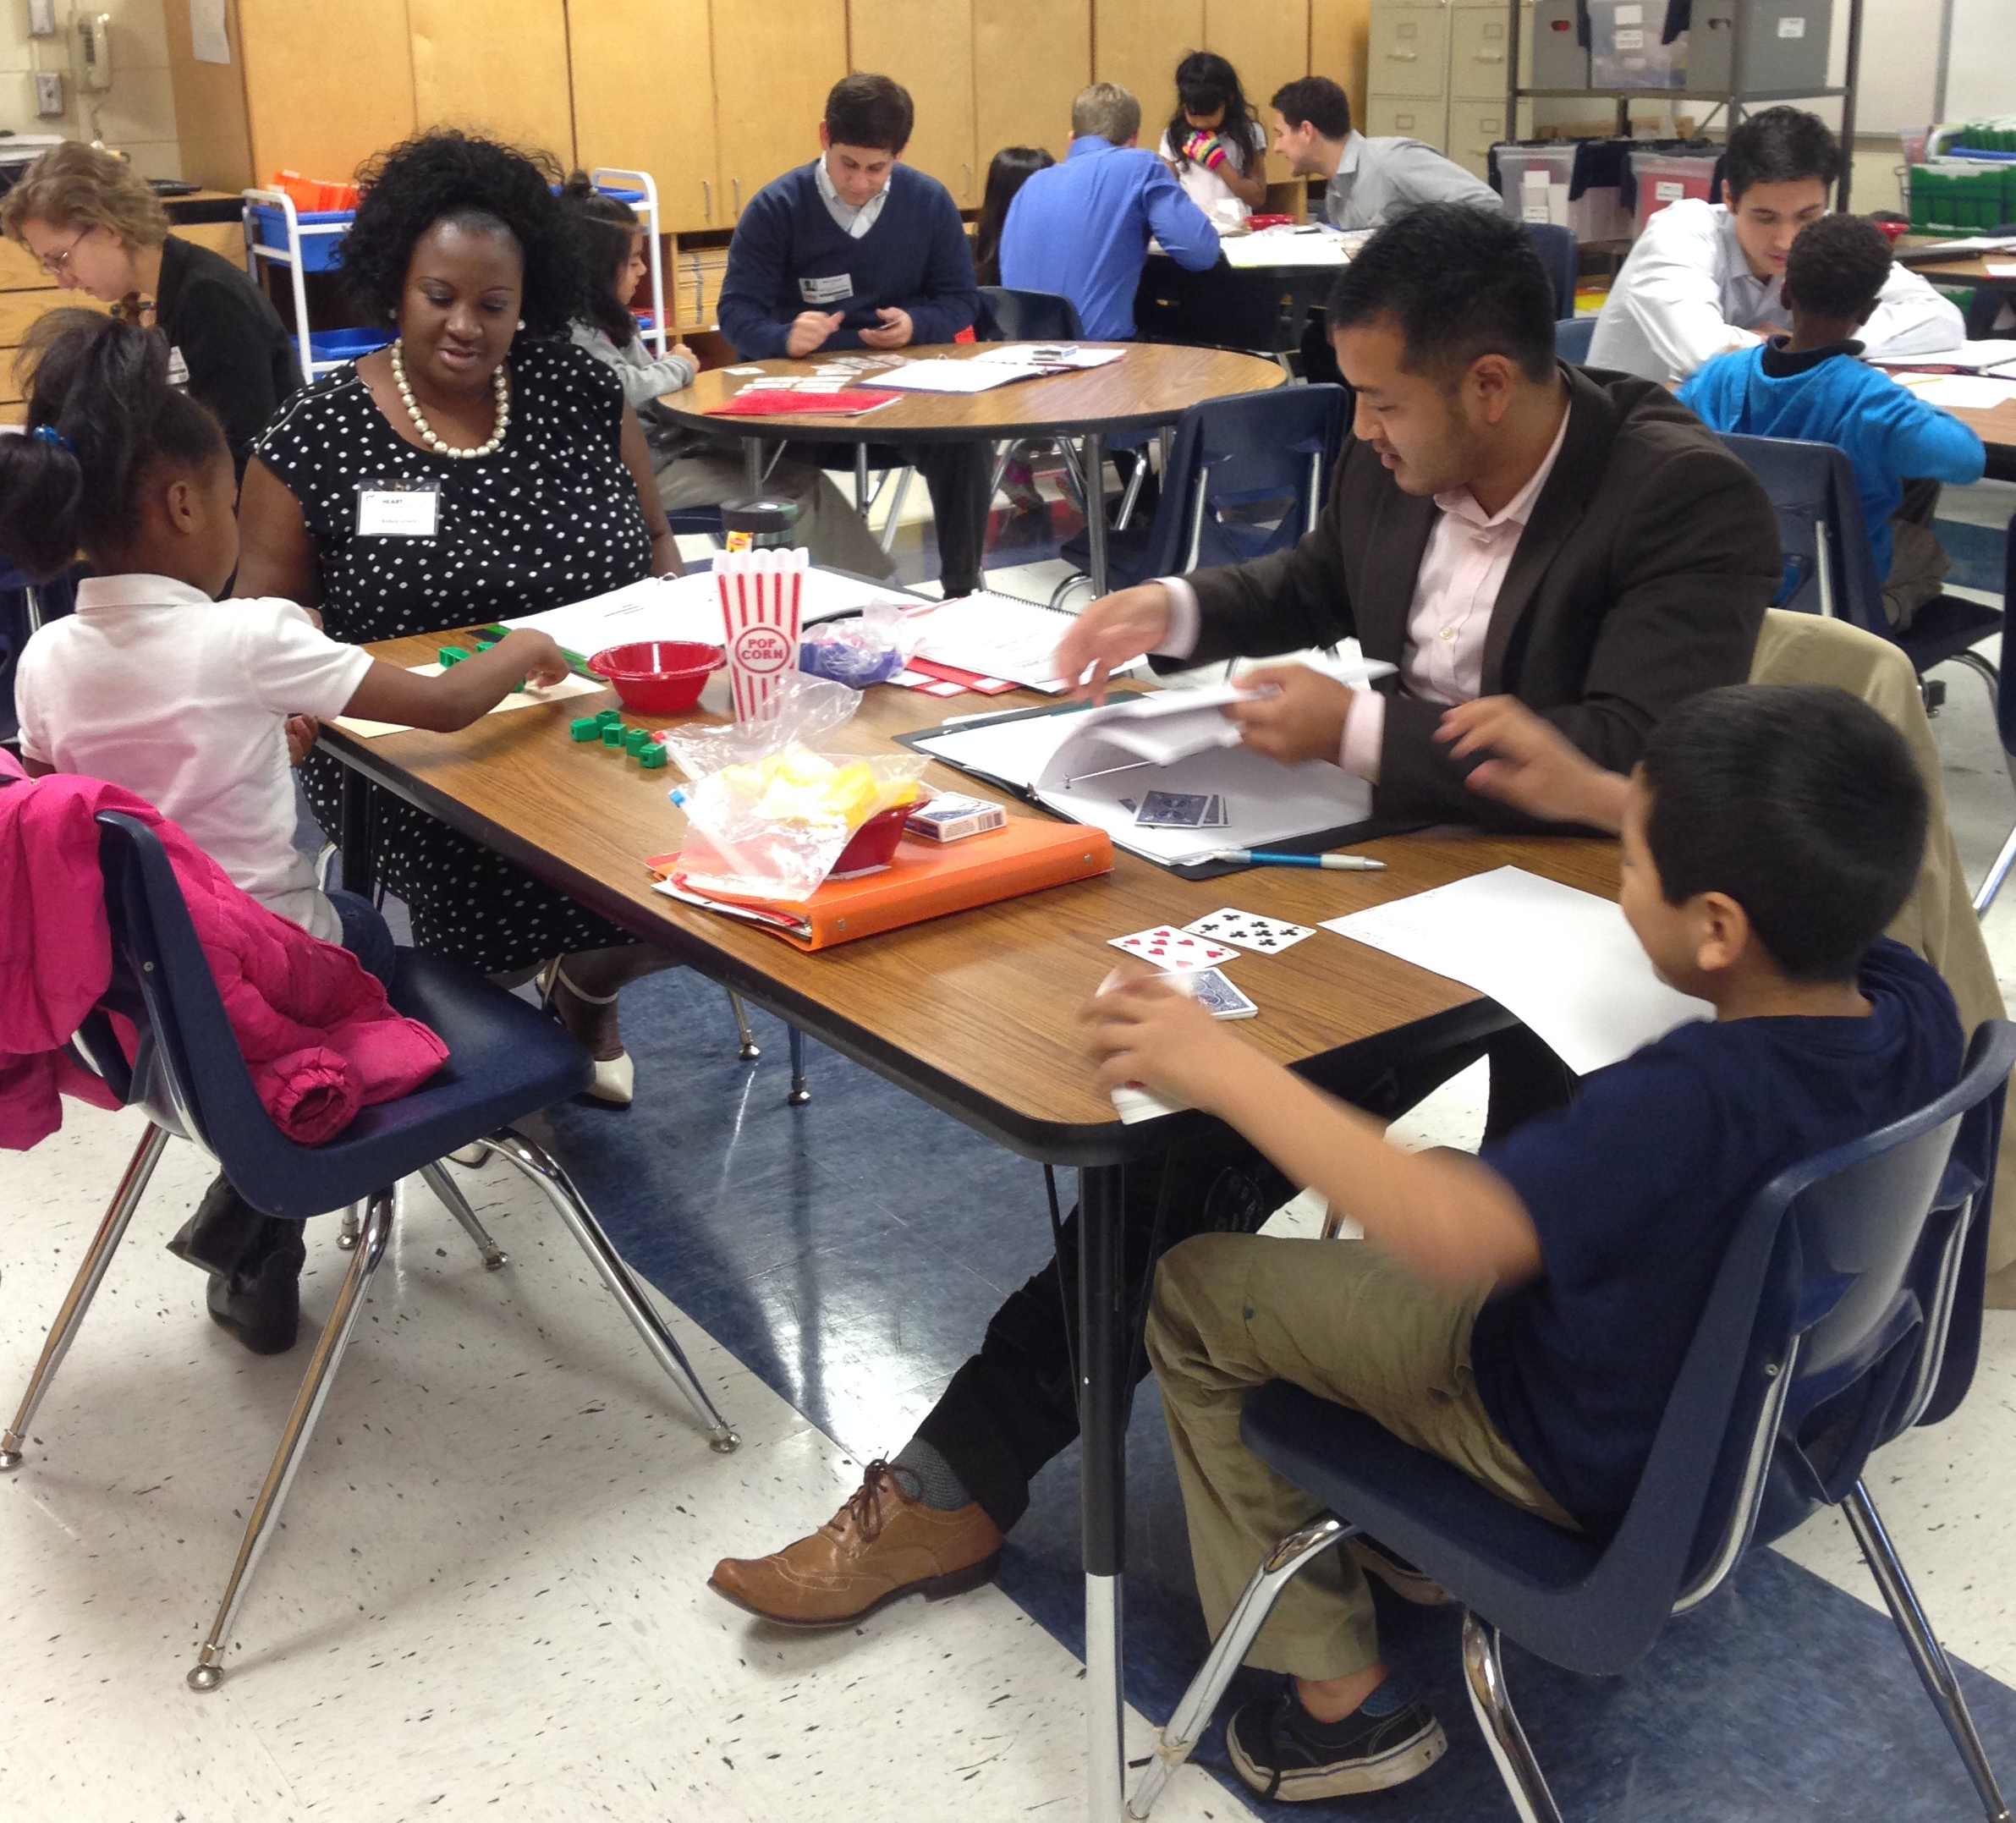 Students and tutors at Winterfield Elementary